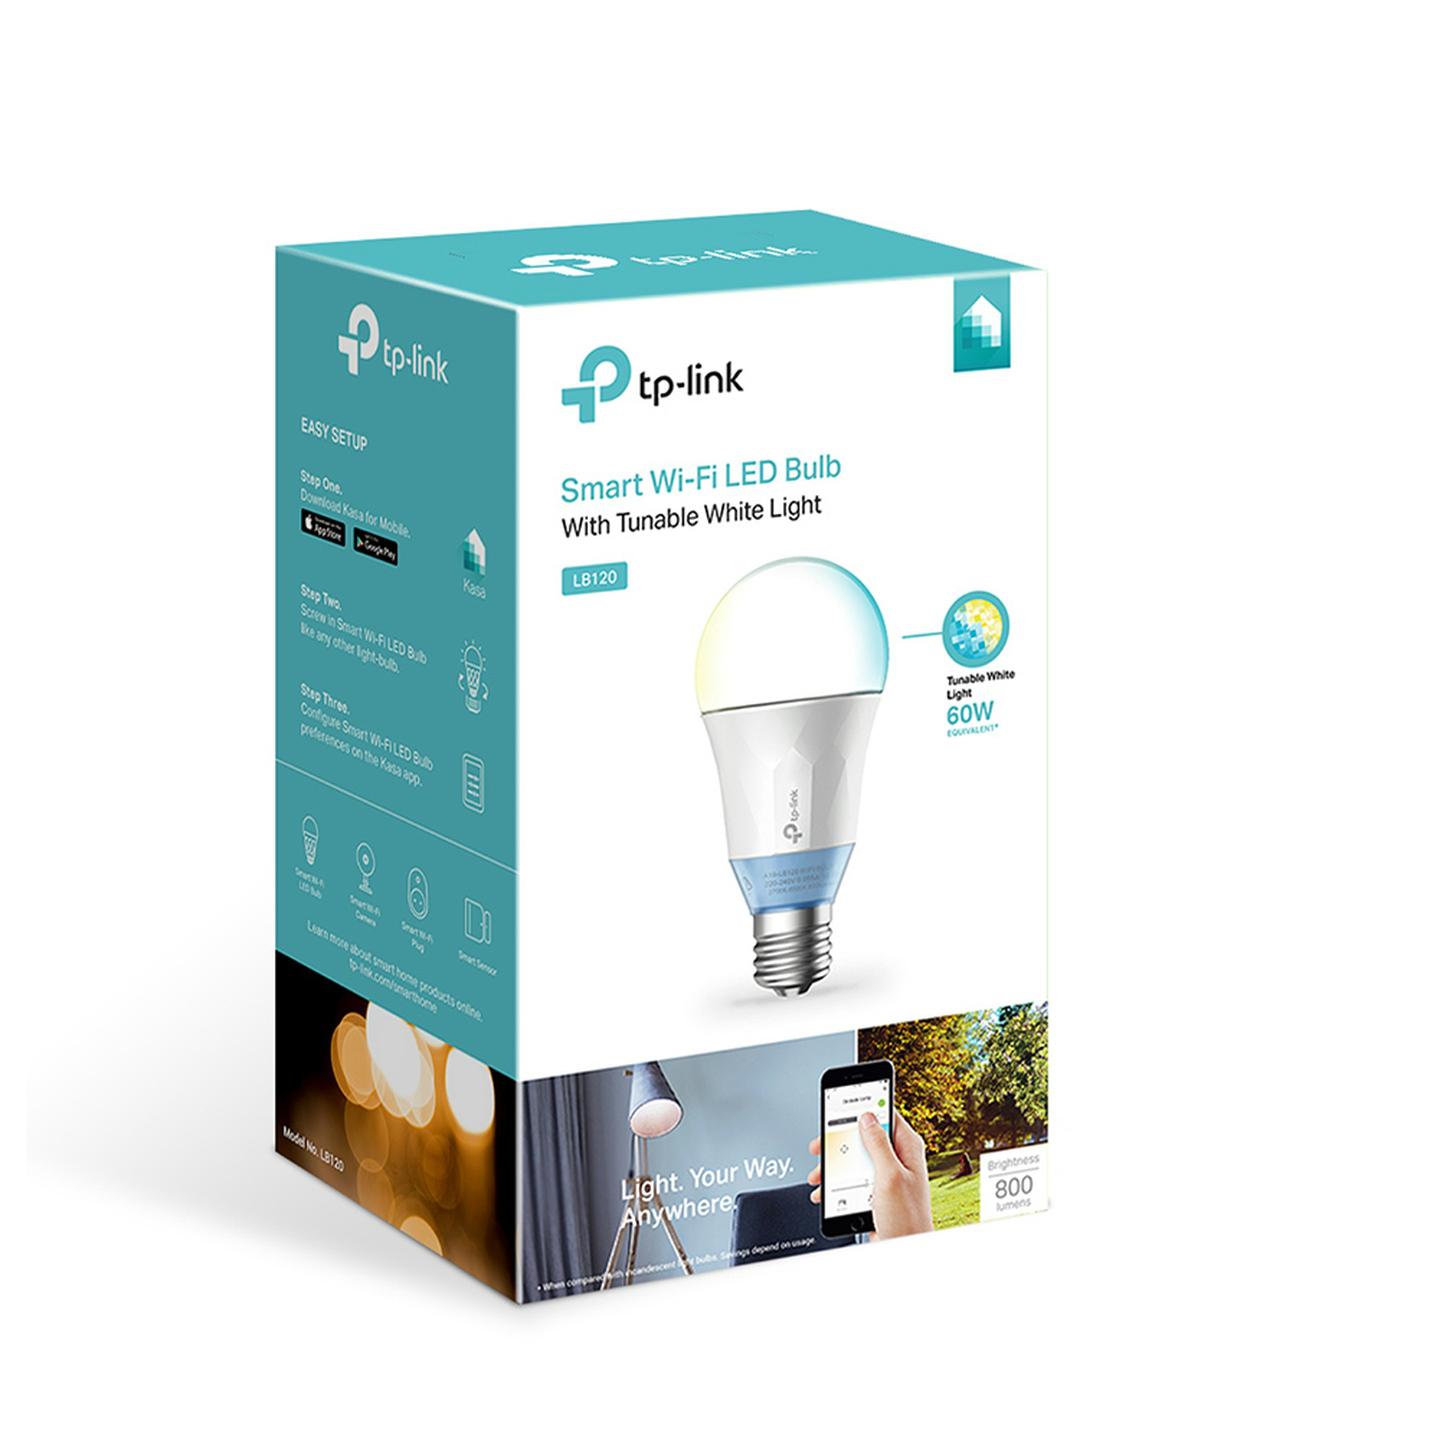 TP-Link Smart Wi-Fi LED Bulb with Tuneable white